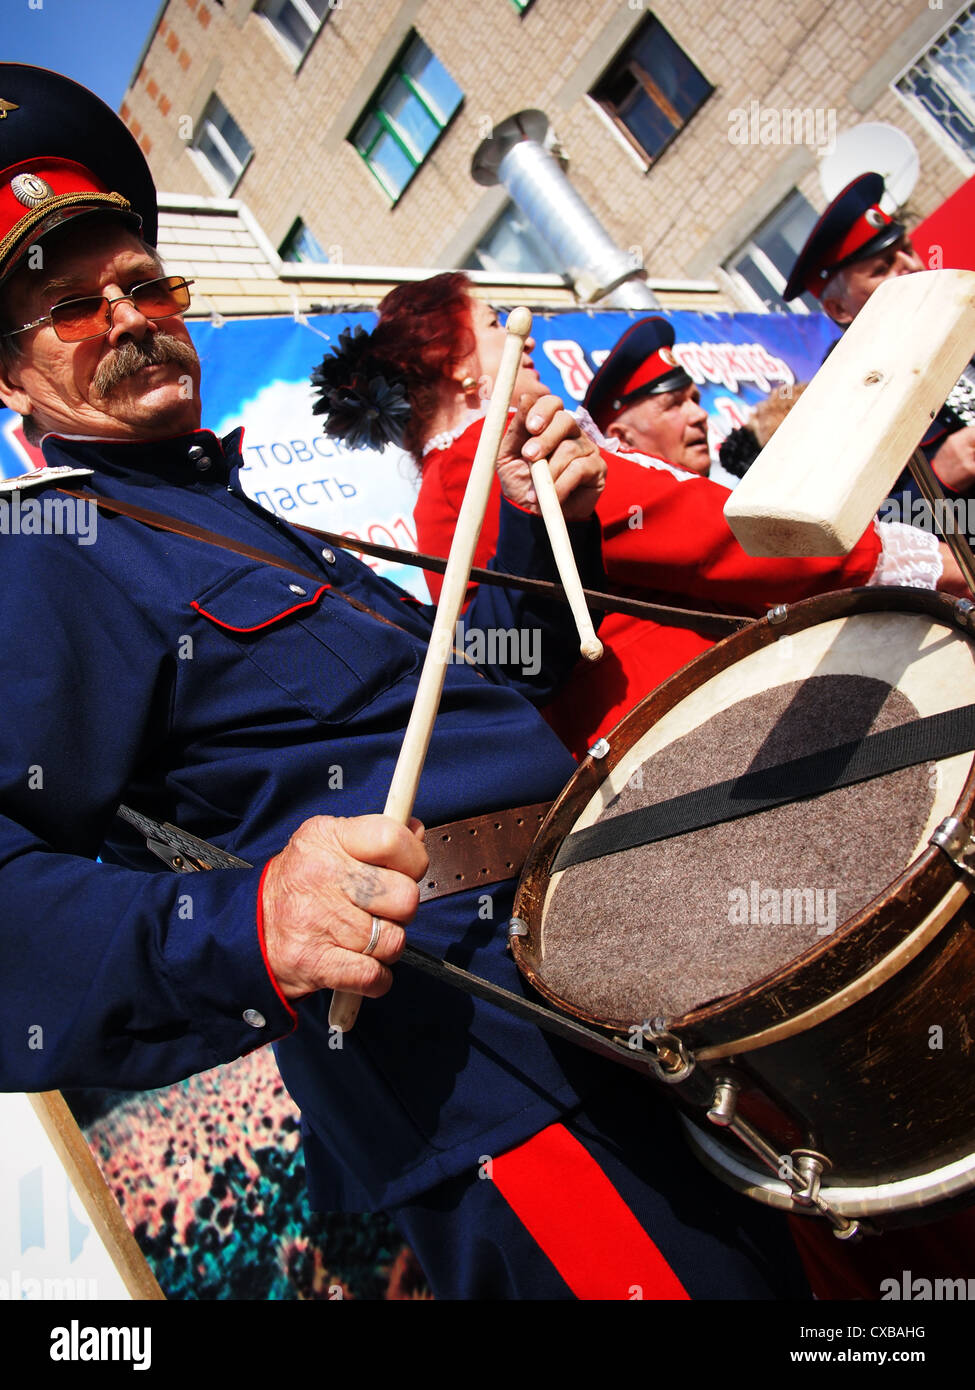 Cossack ensemble performance at an agricultural fair Stock Photo